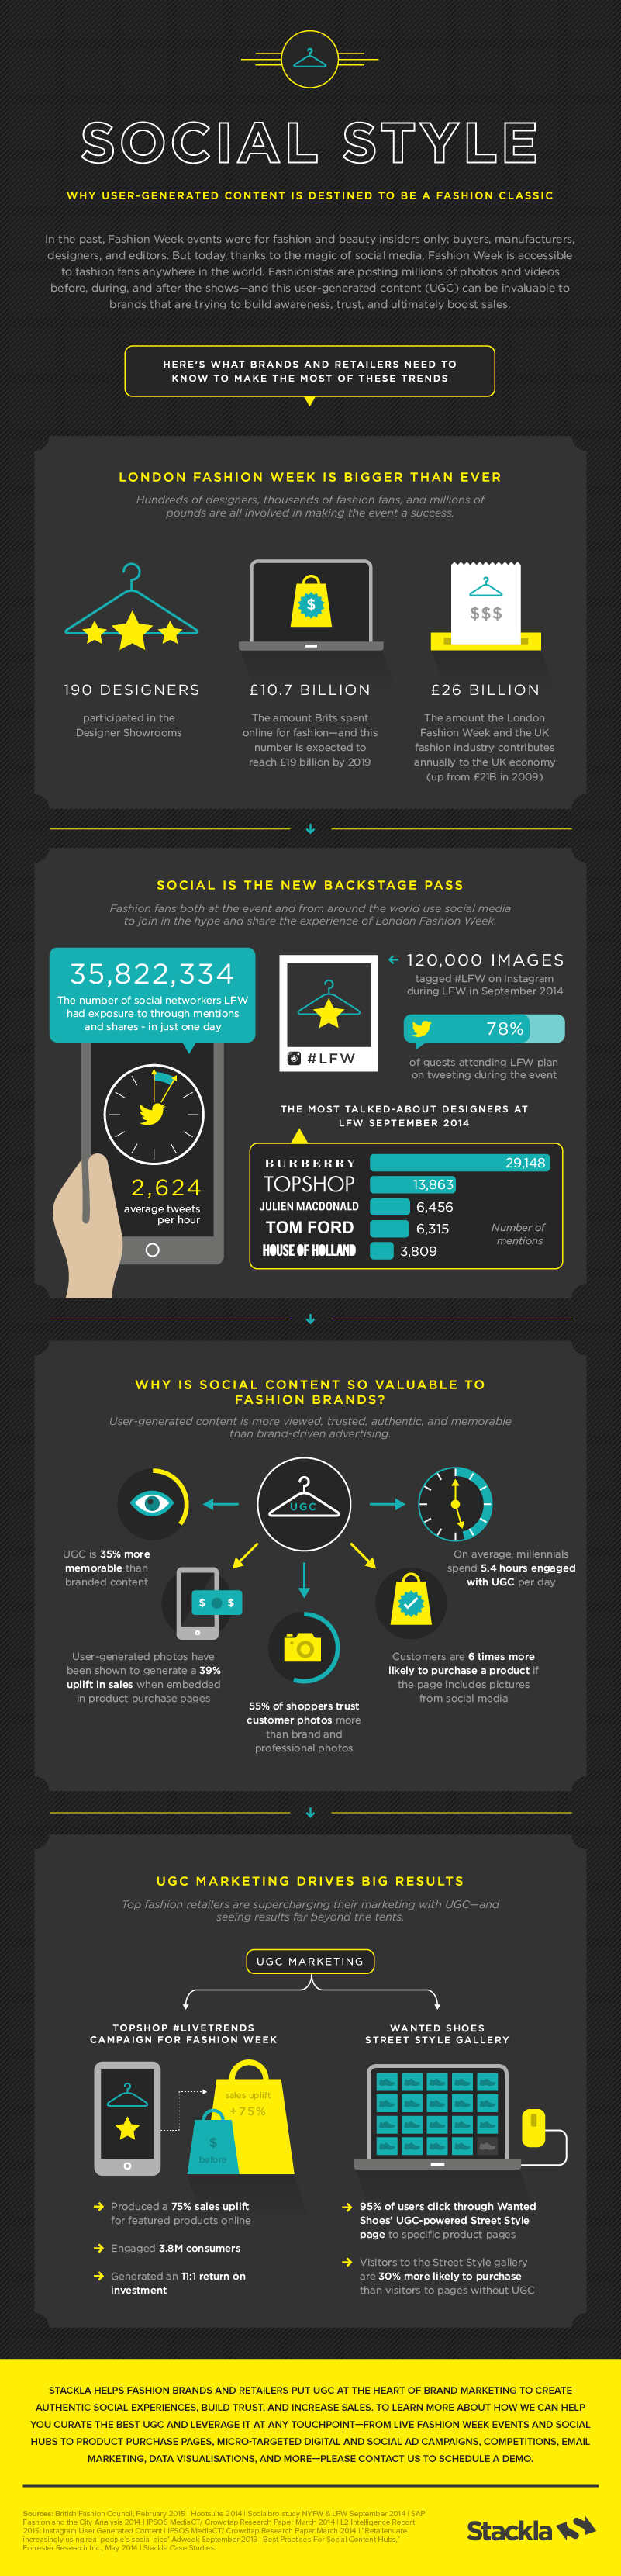 Infographic: Social is the Best Bet for London Fashion Week